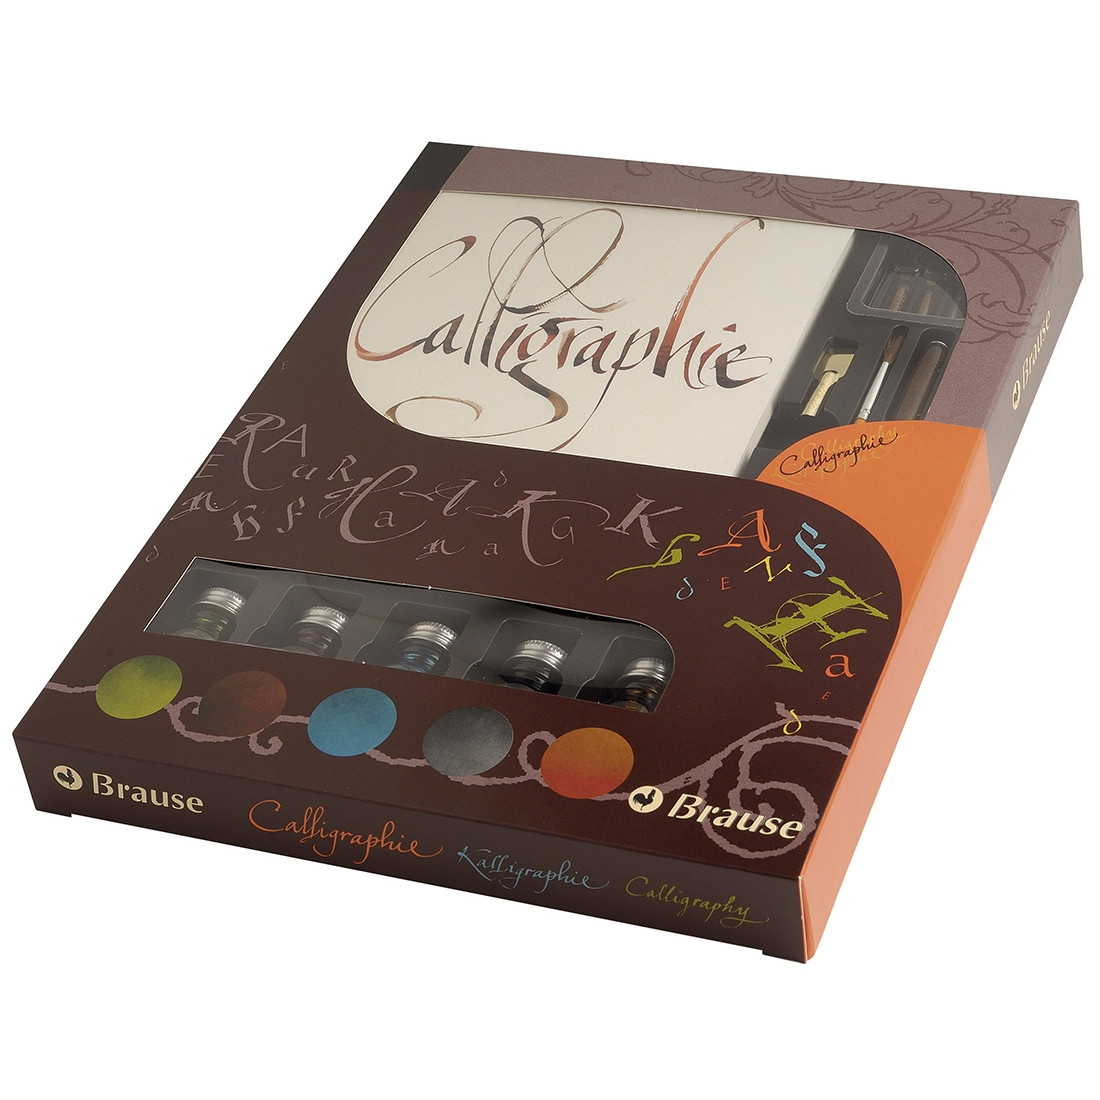 Brause Calligraphy Gift Set with Notebook & Ink Bottle